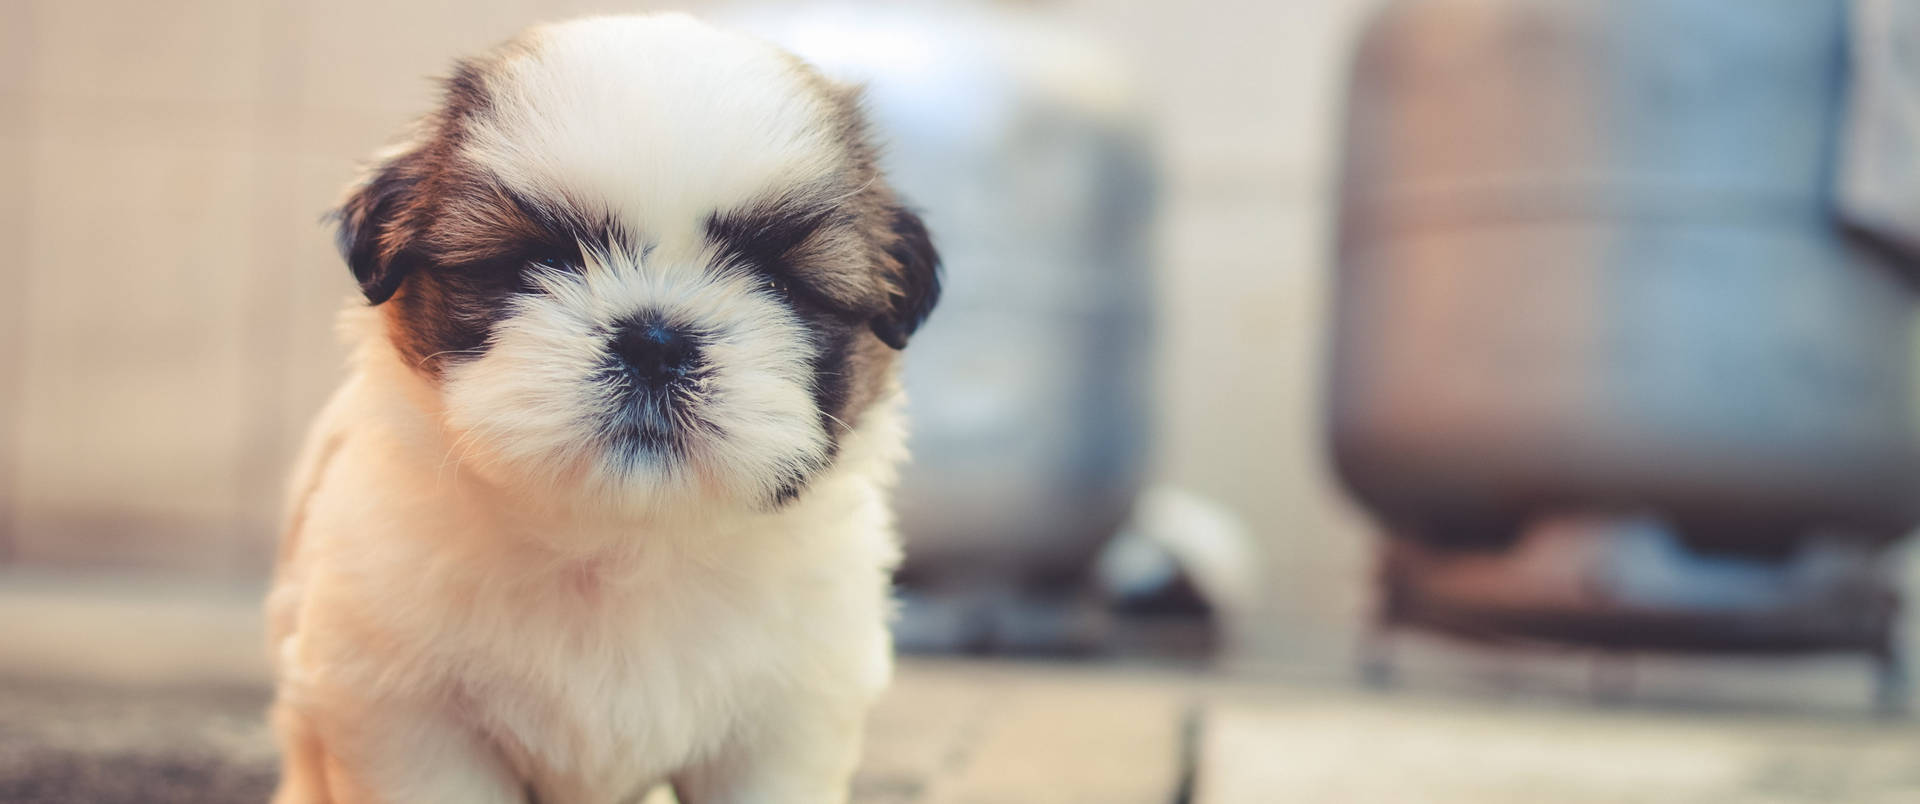 Baby Dog With Eyes Closed Wallpaper